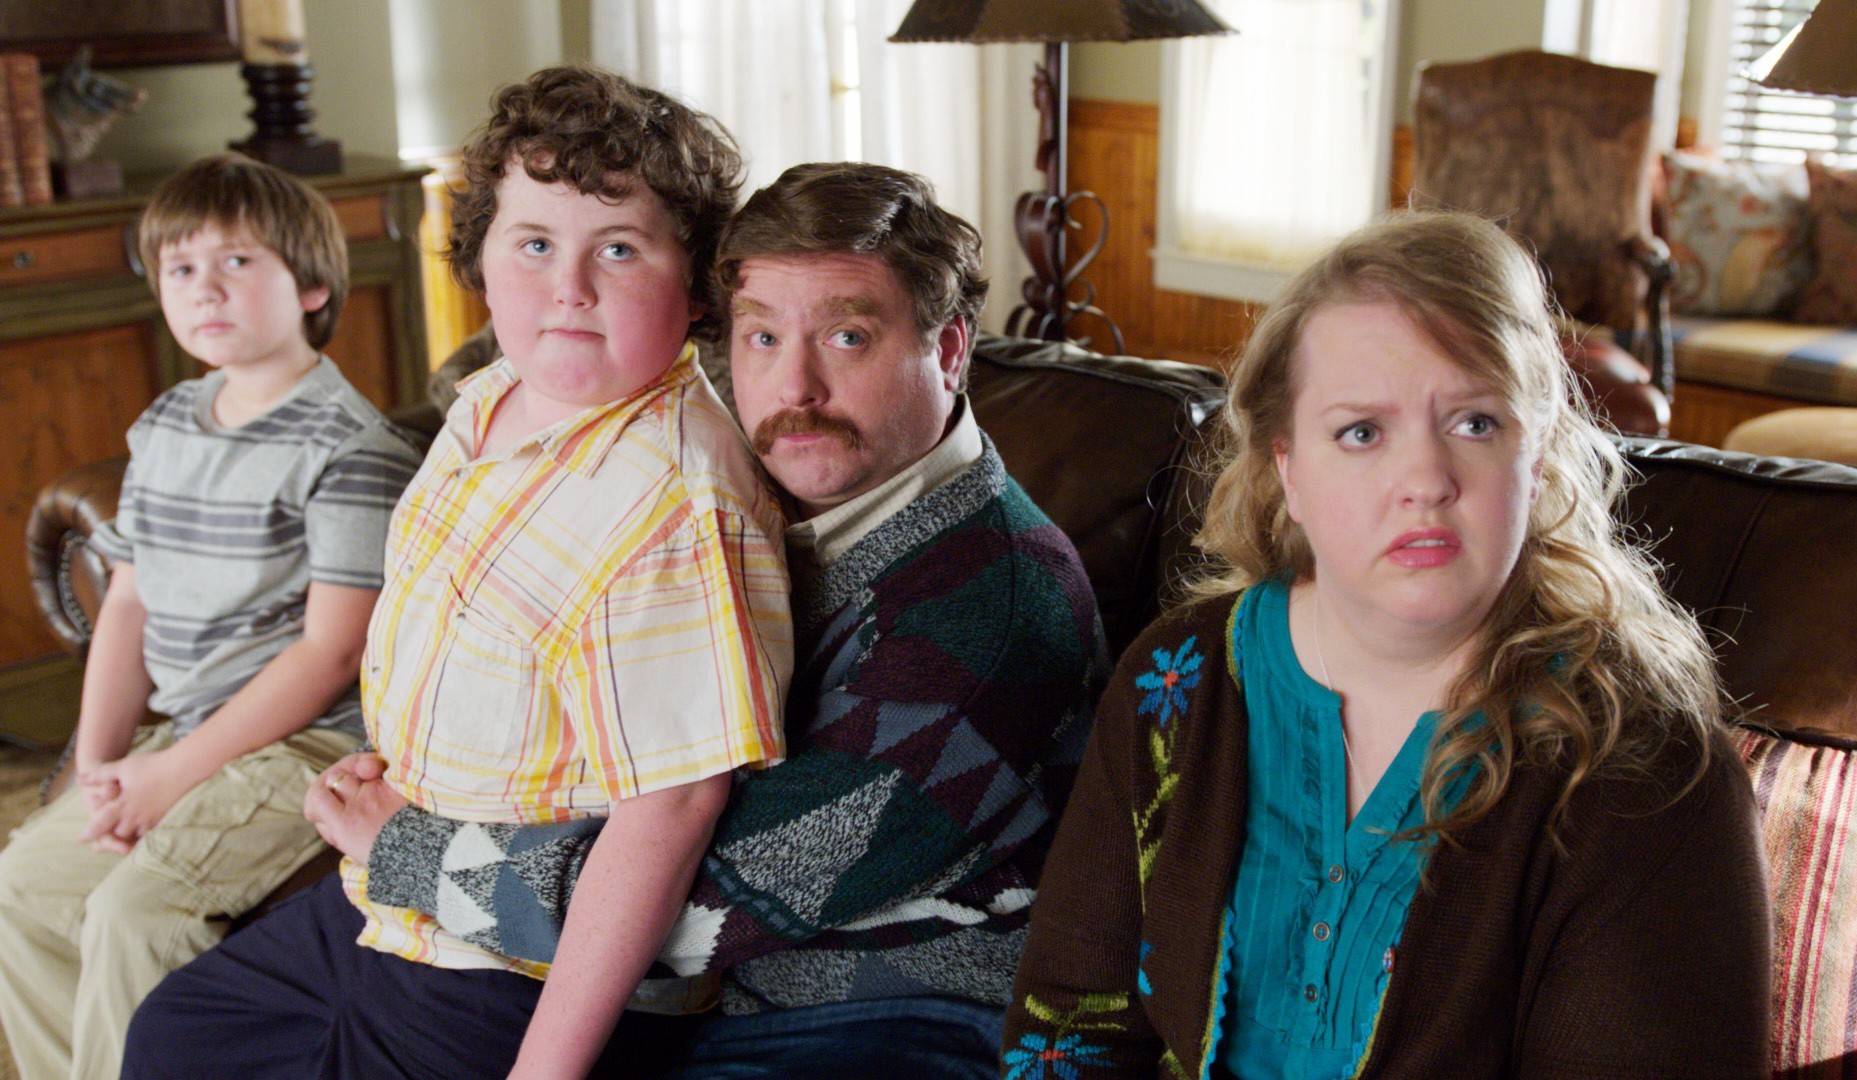 Kya Haywood, Grant Goodman, Zach Galifianakis and Sarah Baker in Warner Bros. Pictures' The Campaign (2012)